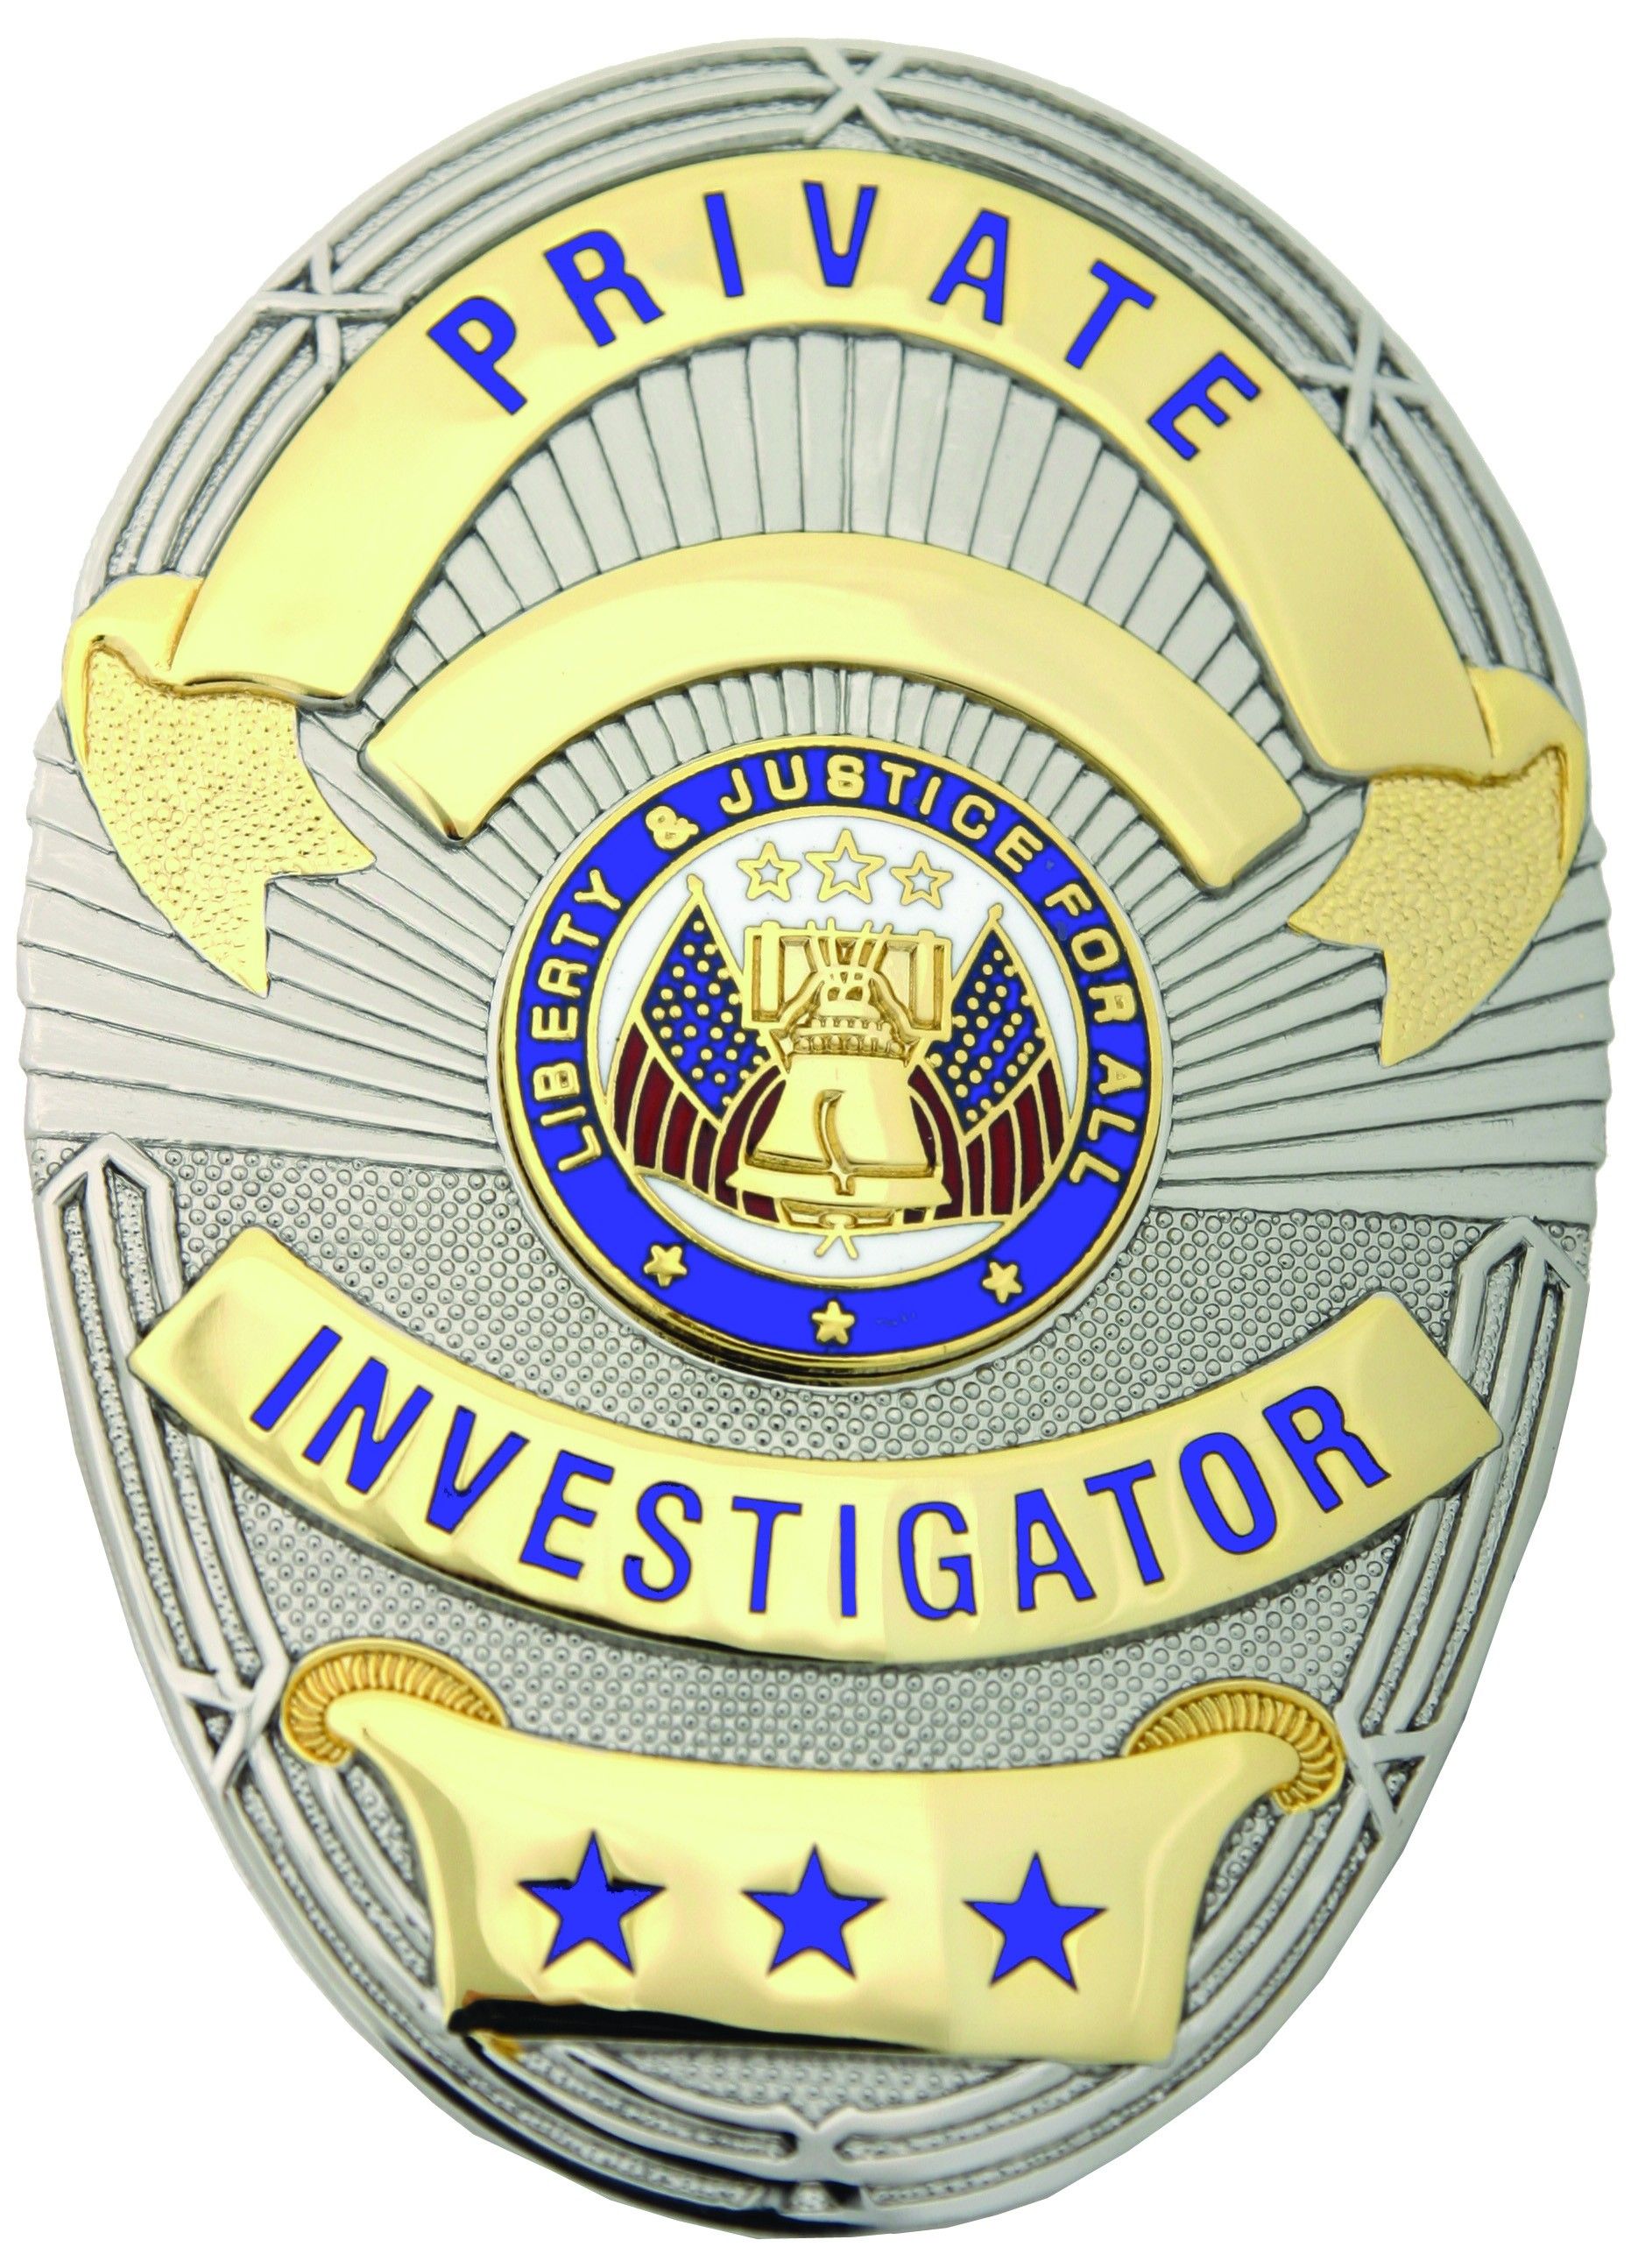 File:Badge of a New York City